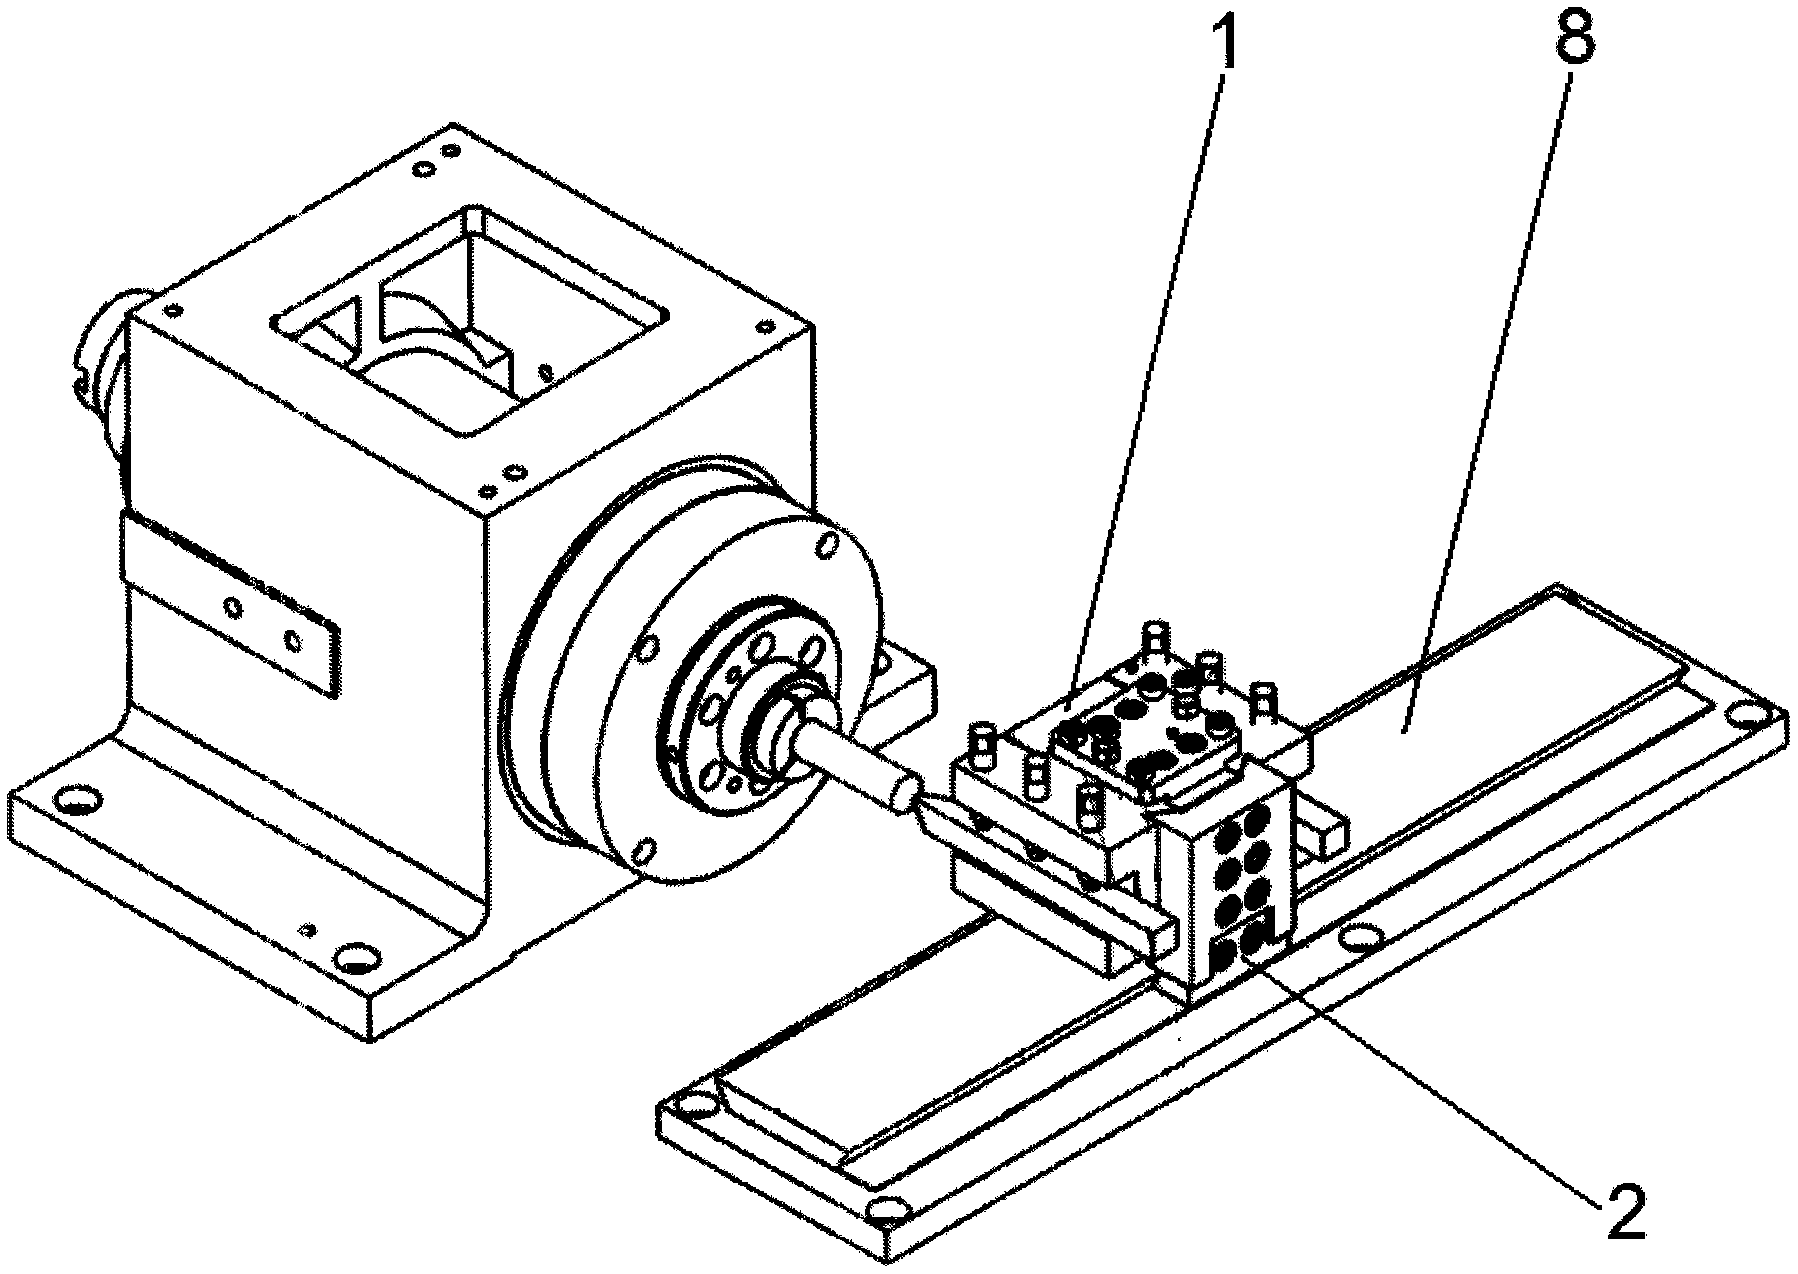 Dual-connection tool apron of row tool lathe